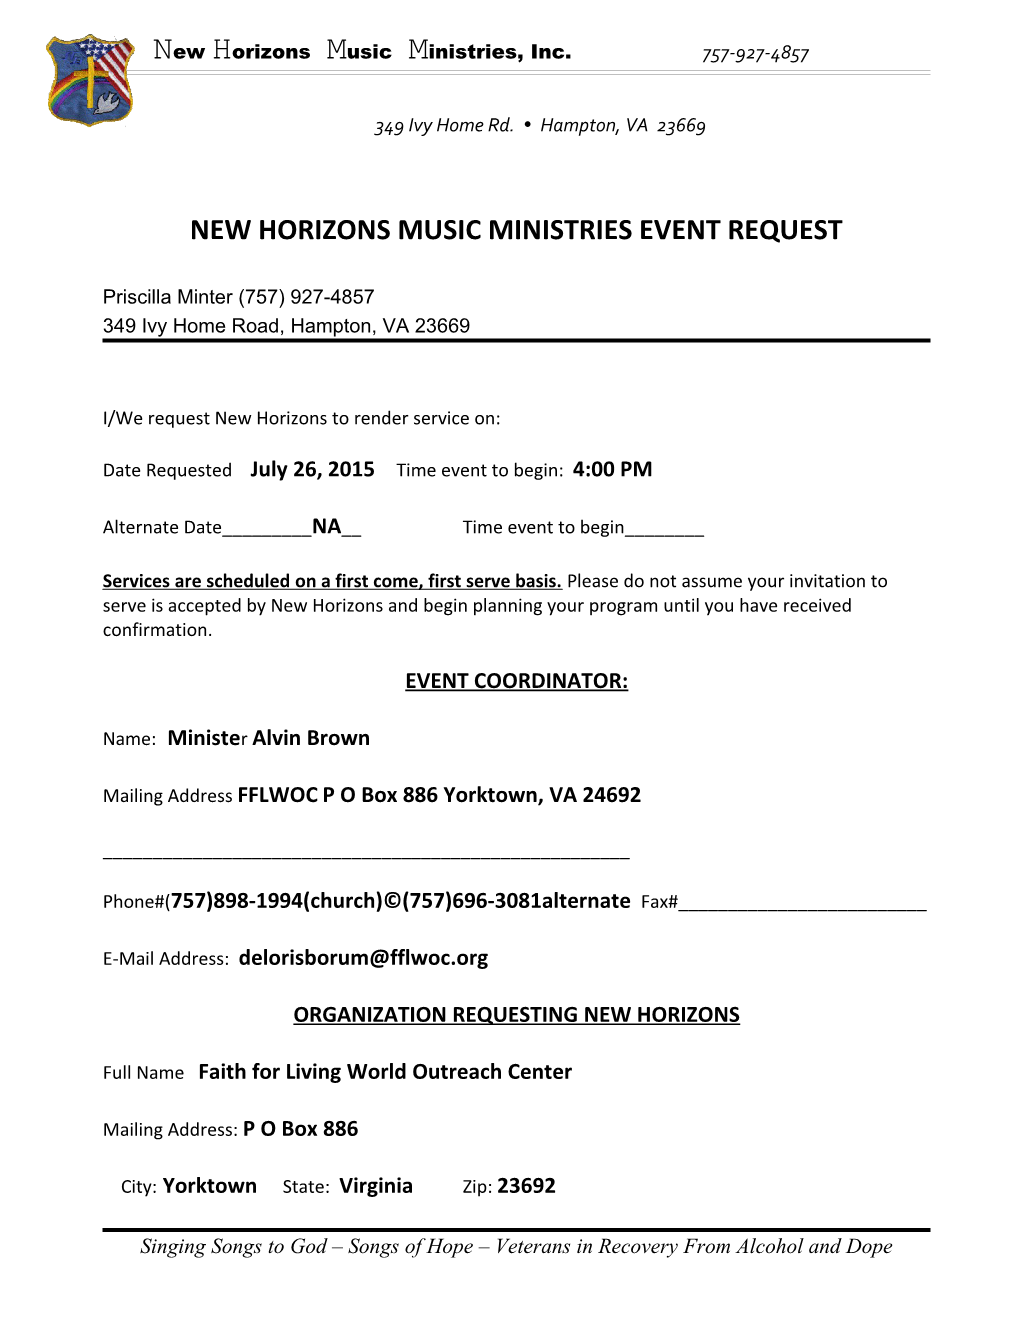 New Horizons Music Ministries Event Request